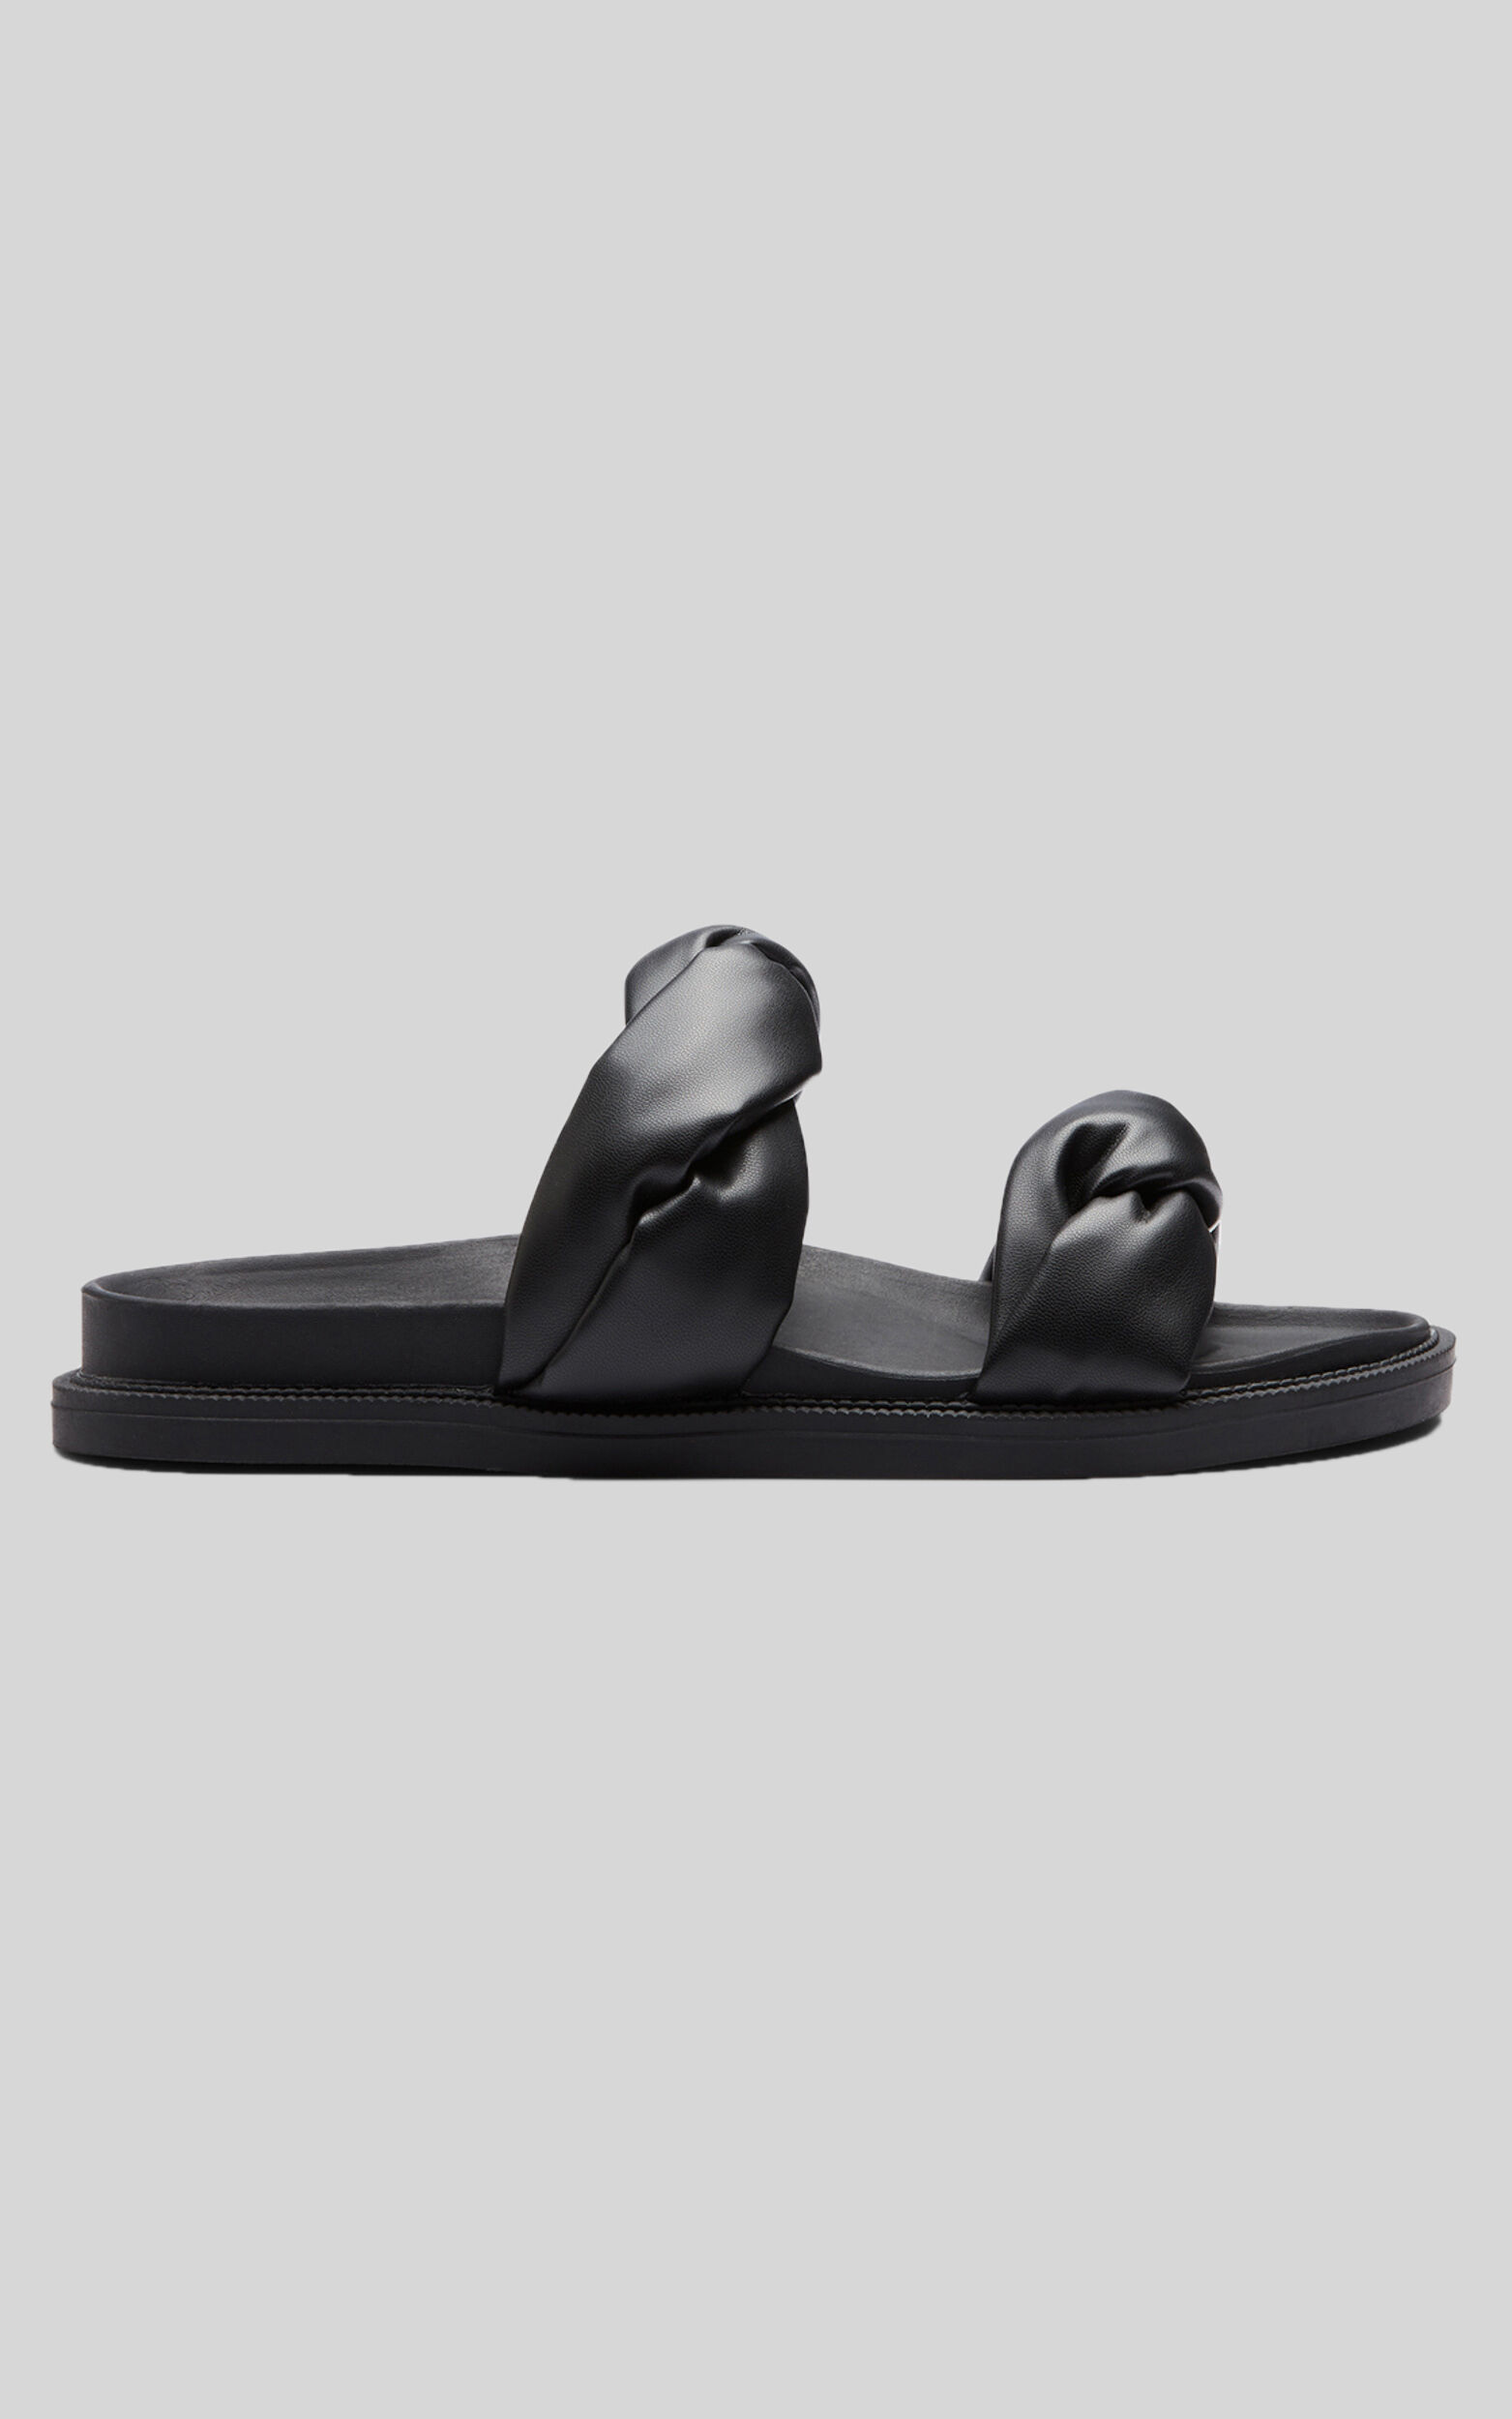 Therapy - Lingo Slides in Black - 06, BLK1